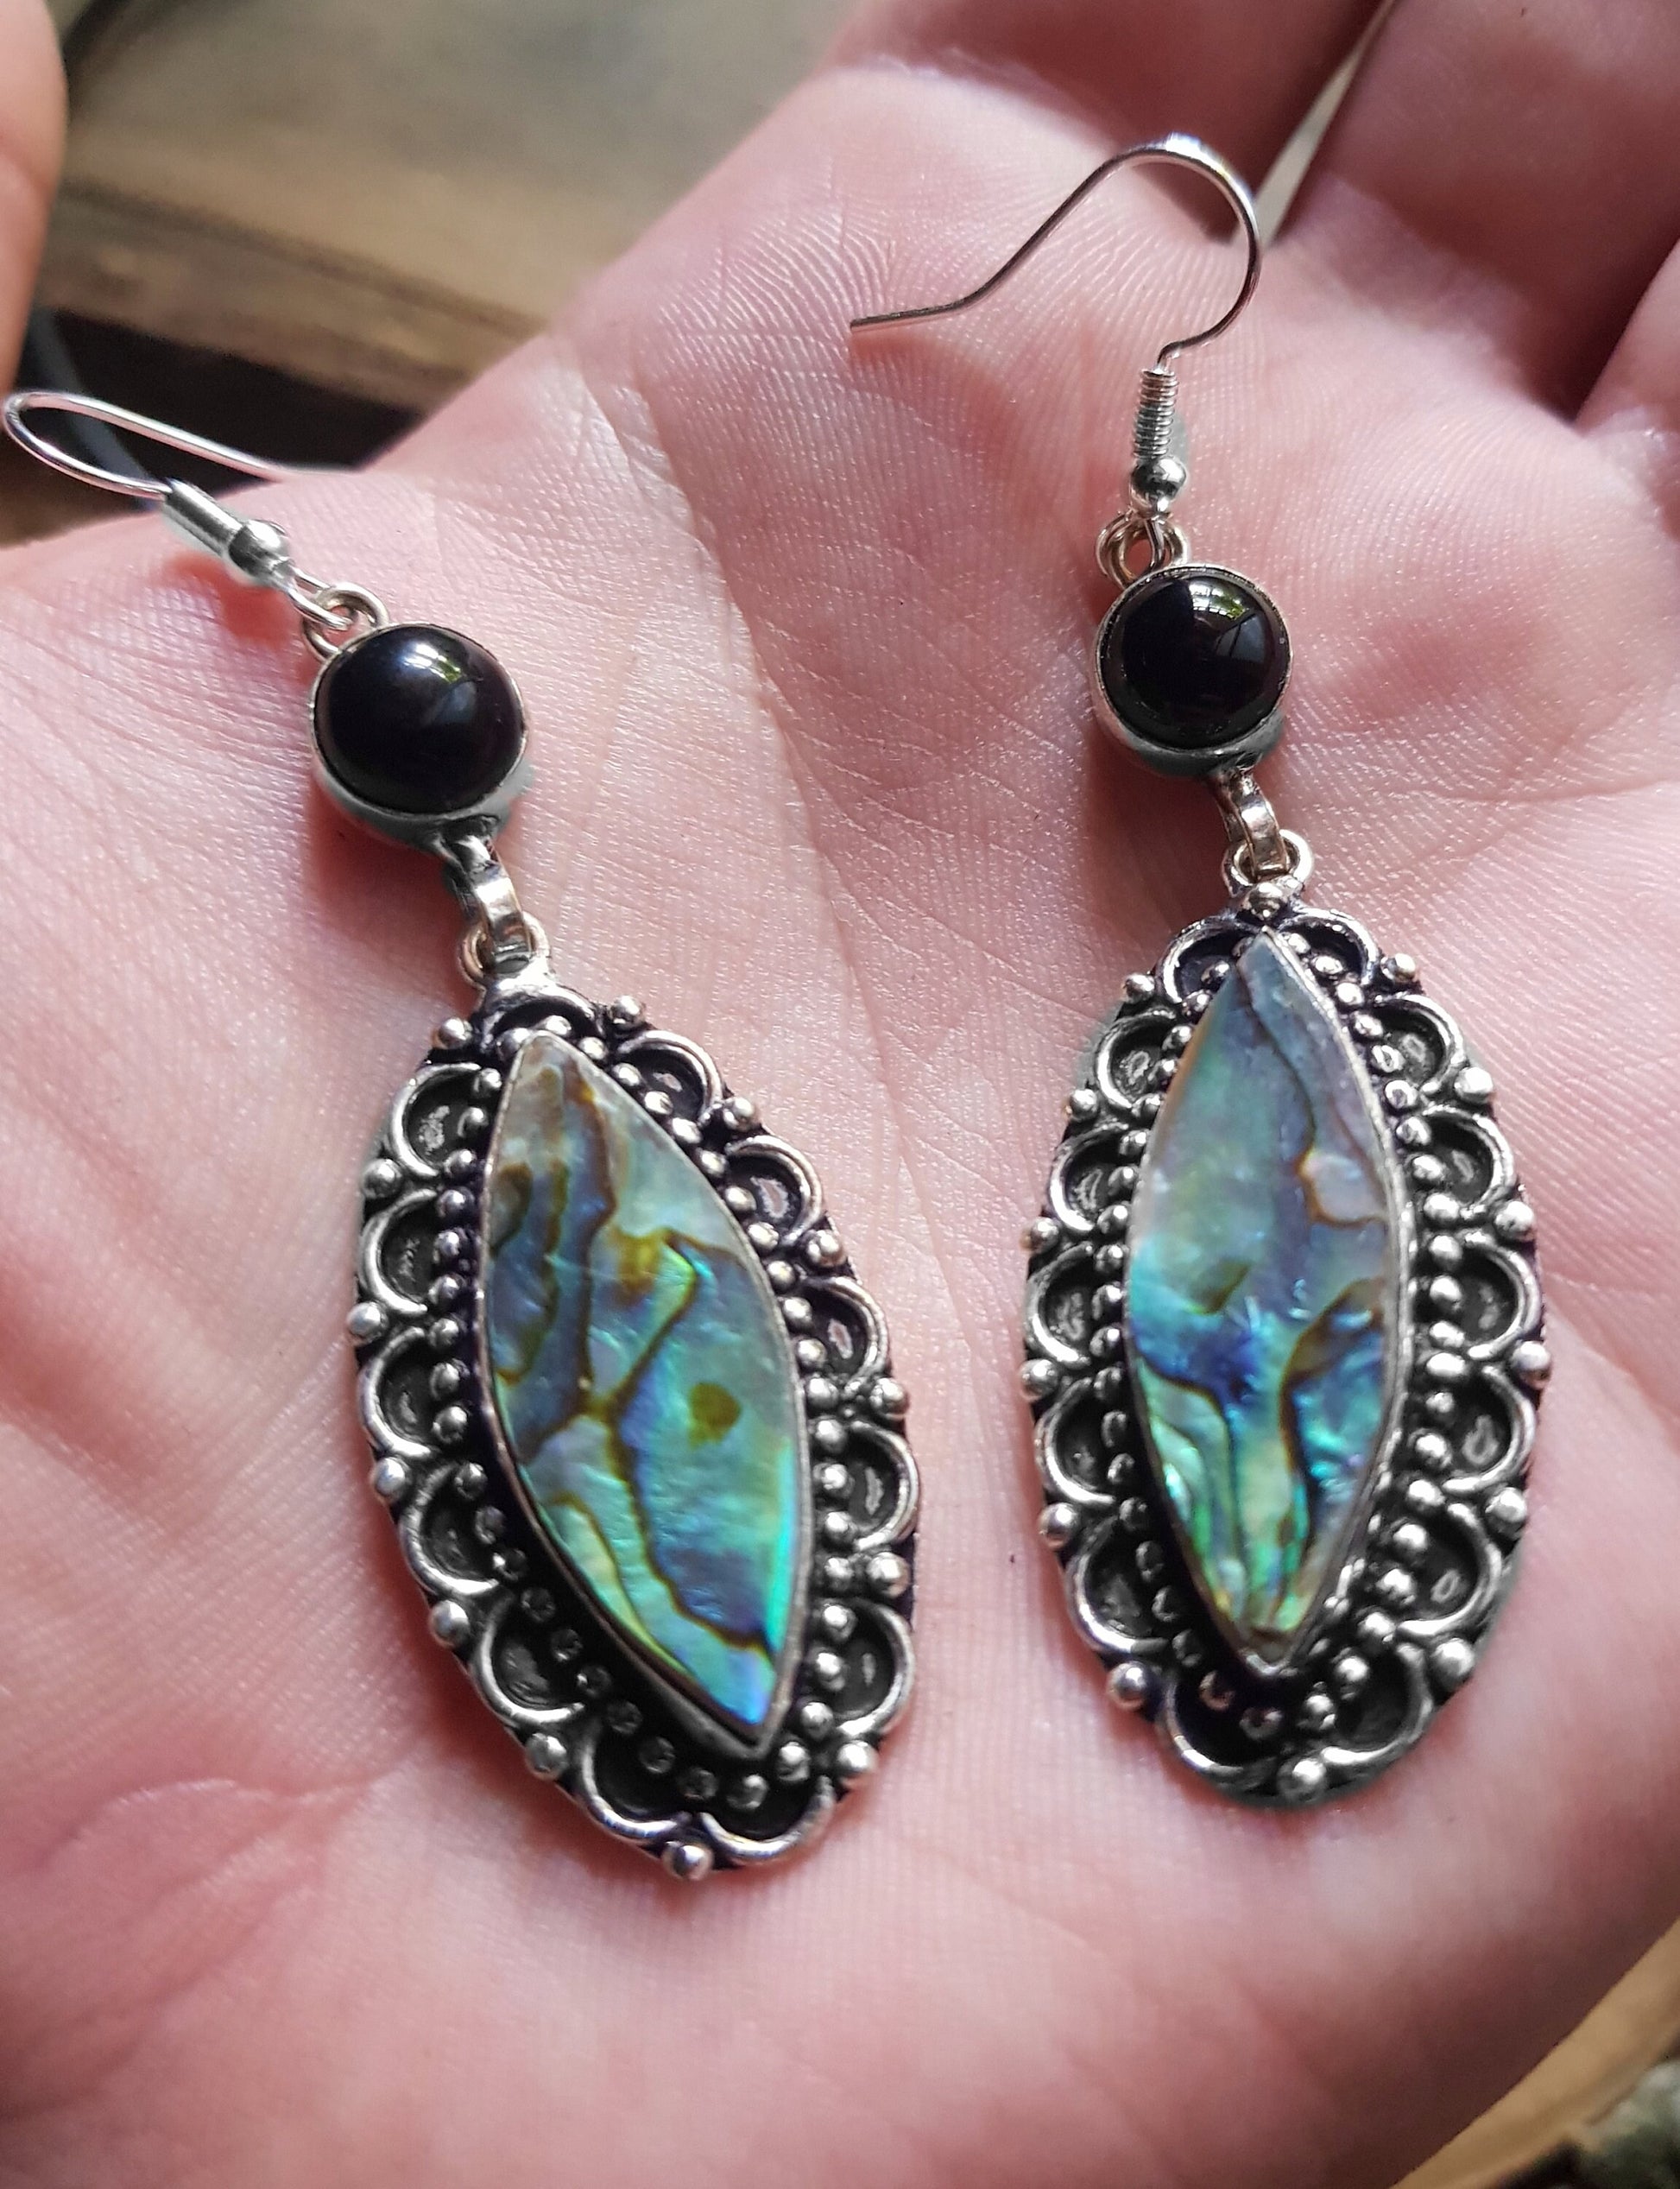 Labradorite And Abalone Shell Earrings In Sterling Silver, Statement Dangle Earrings One Of A Kind